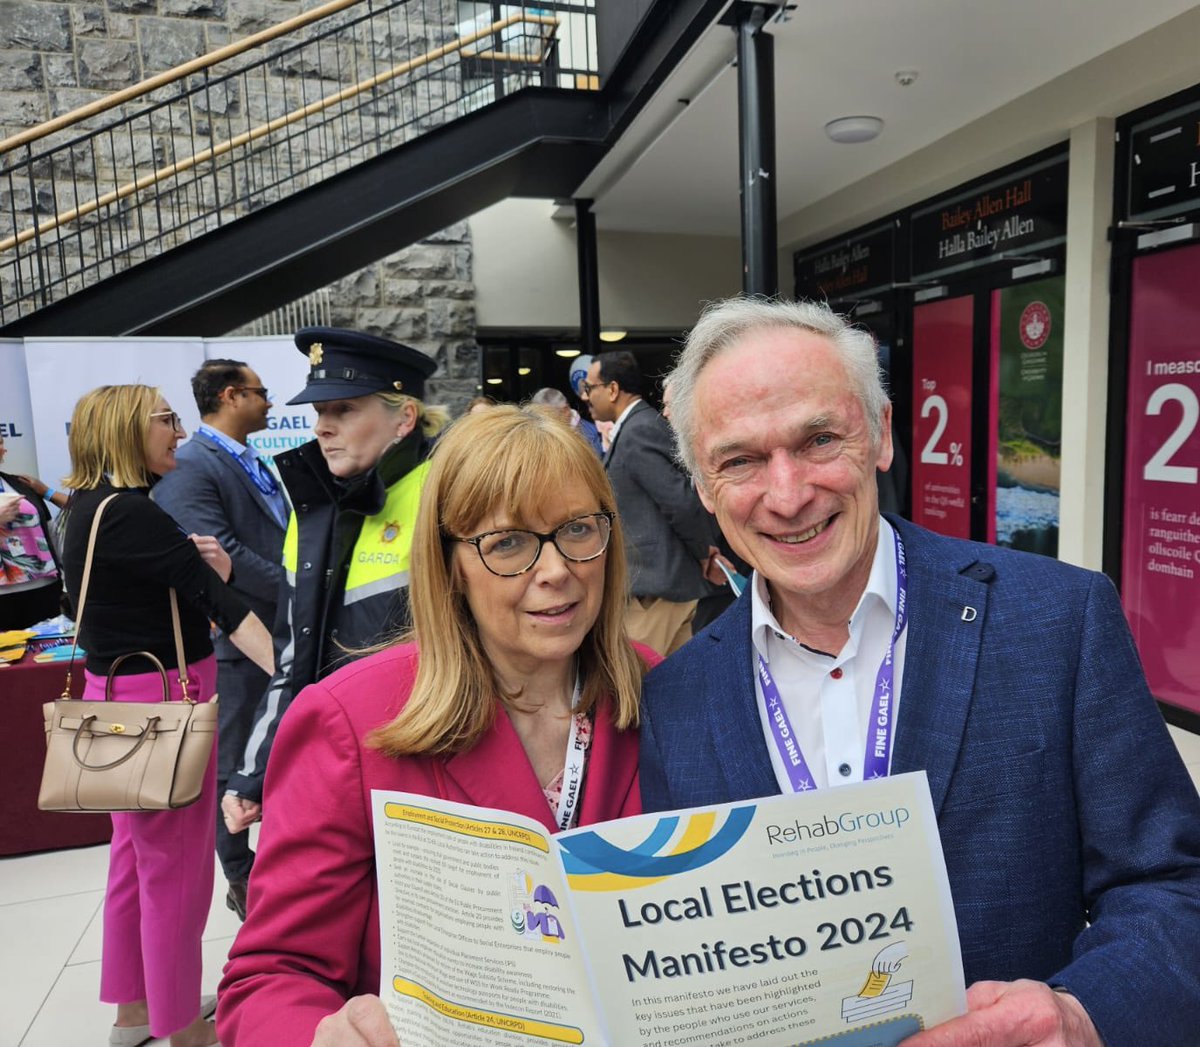 Deputy Richard Bruton TD reading our Local Elections Manifesto at the Fine Gael Ard Fheis in Galway today. The Rehab Group Manifesto sets out the most pressing issues of people with disabilities in our services. #FGAF24